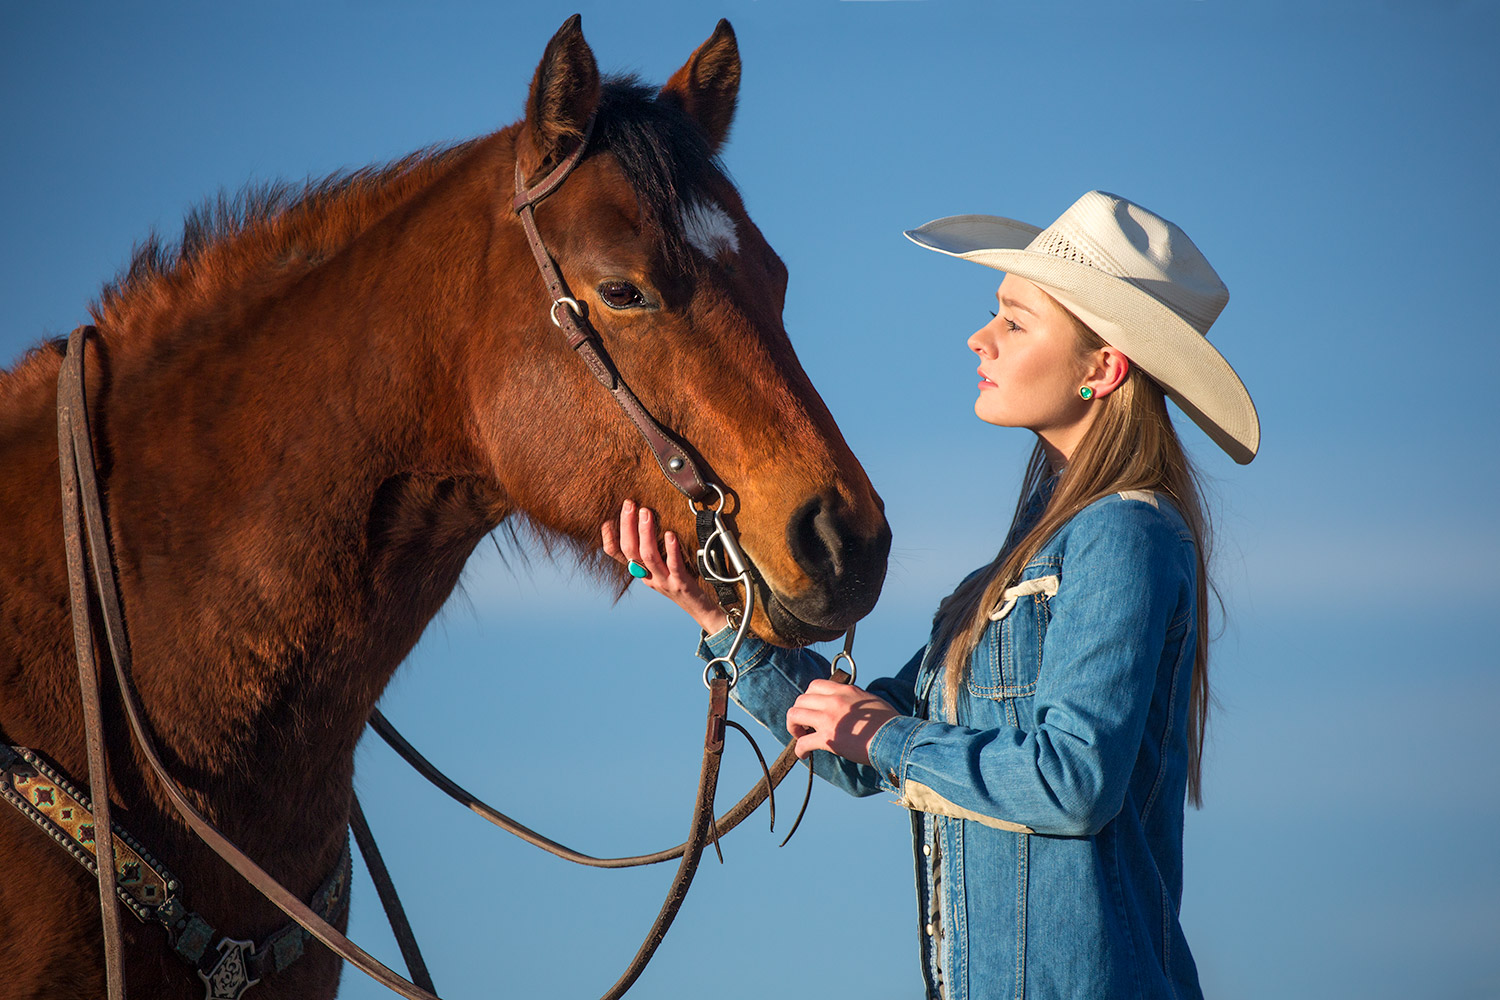 Another cowgirl photo of a young woman petting her horse on a ranch near Bozeman, Montana.